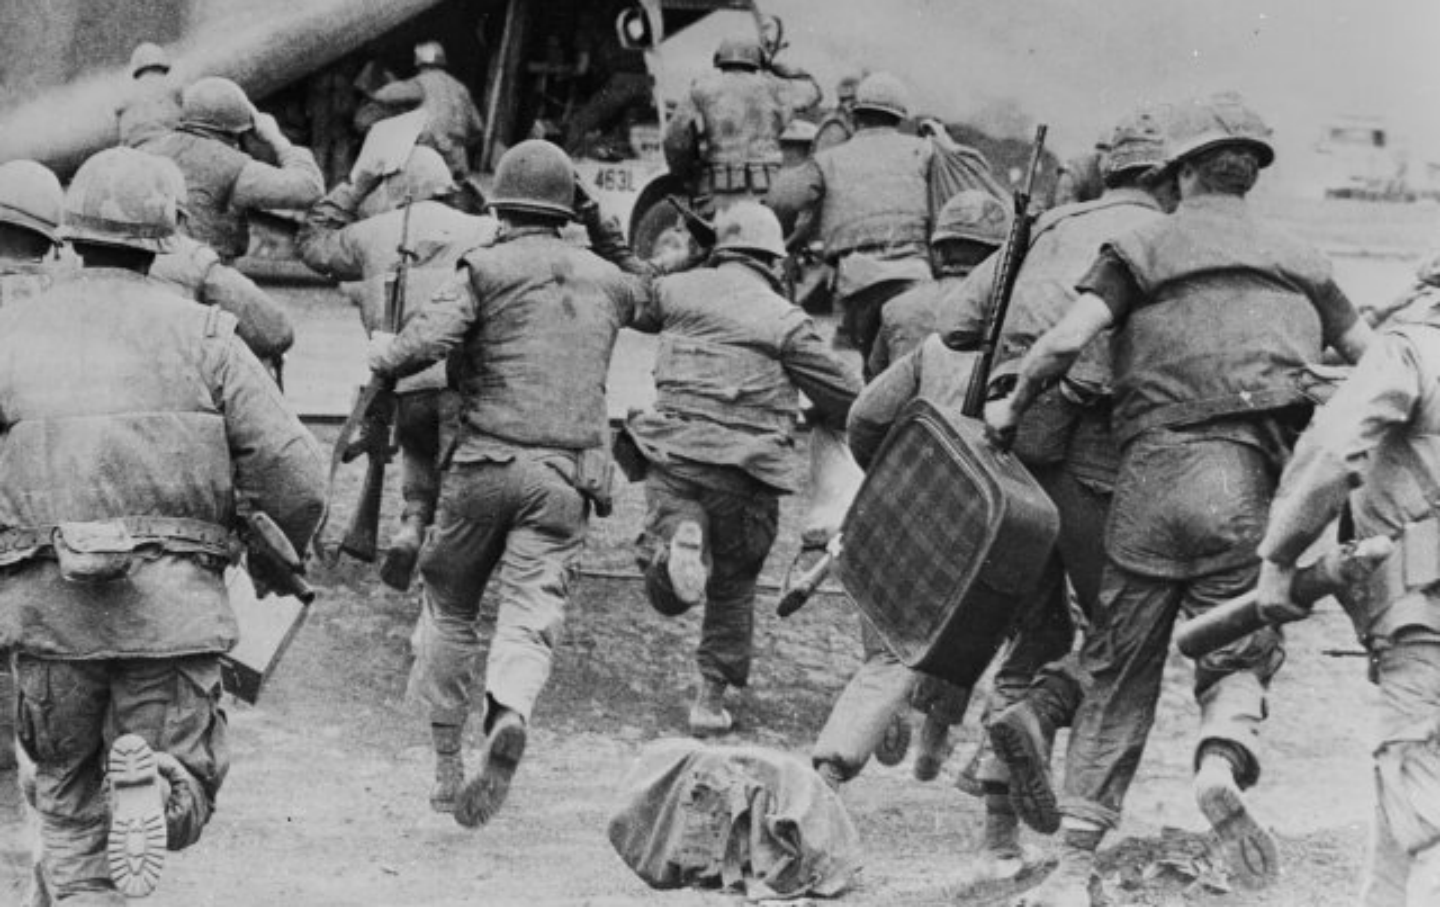 40 Years On, the Taste of Defeat in Vietnam Has Only Become More Rancid |  The Nation